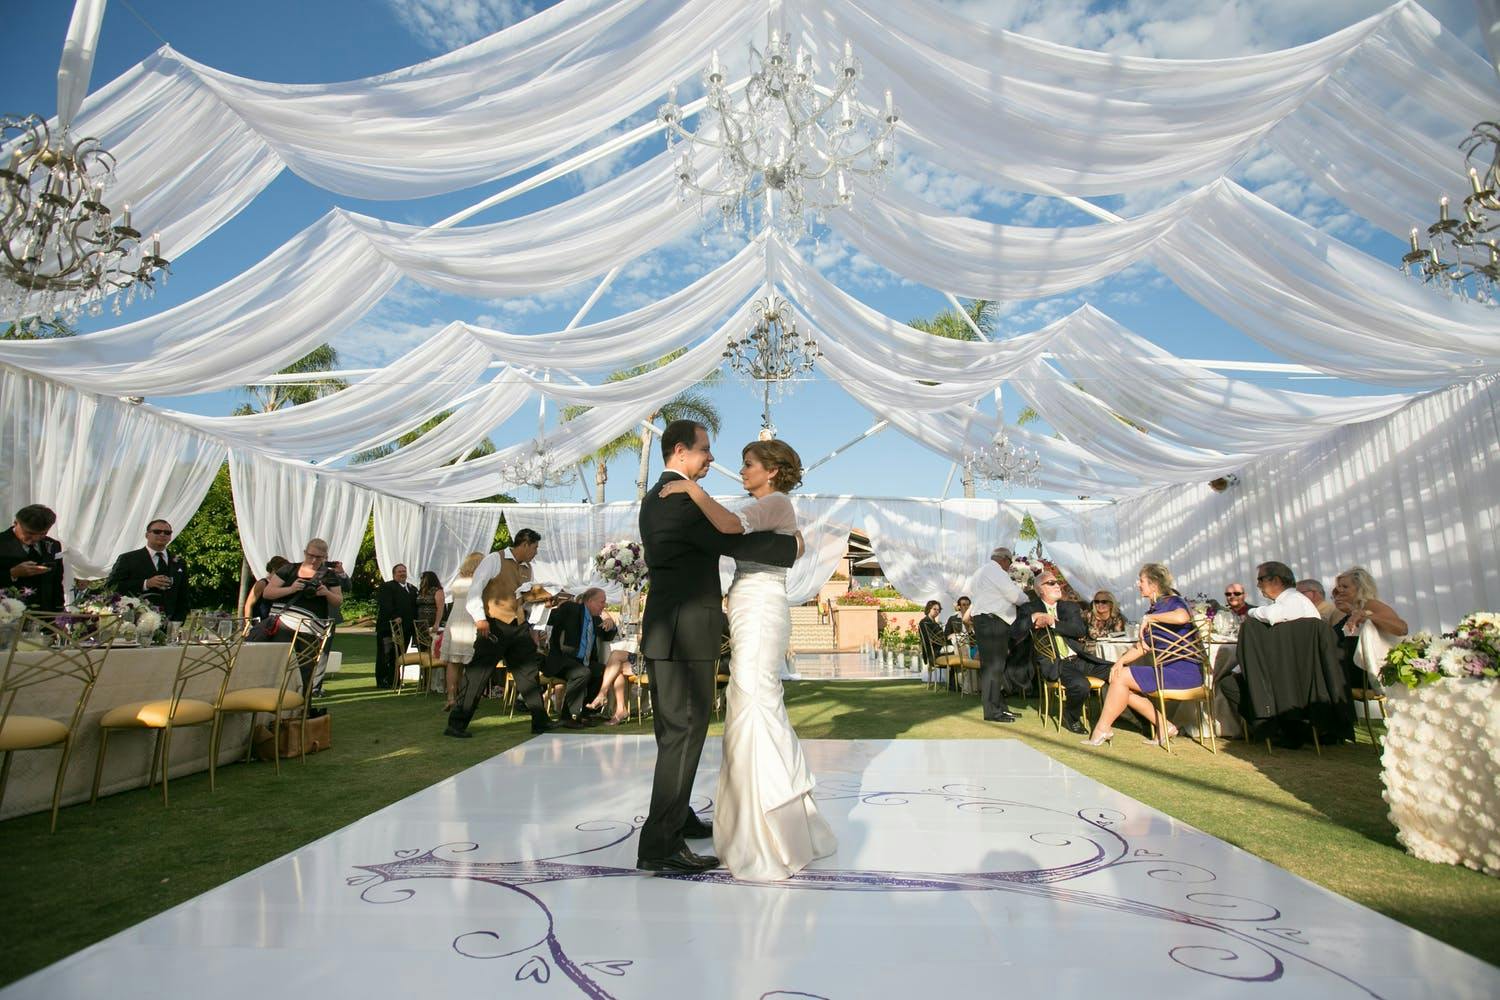 Organic Tented Wedding with Whimsical Hanging Greenery